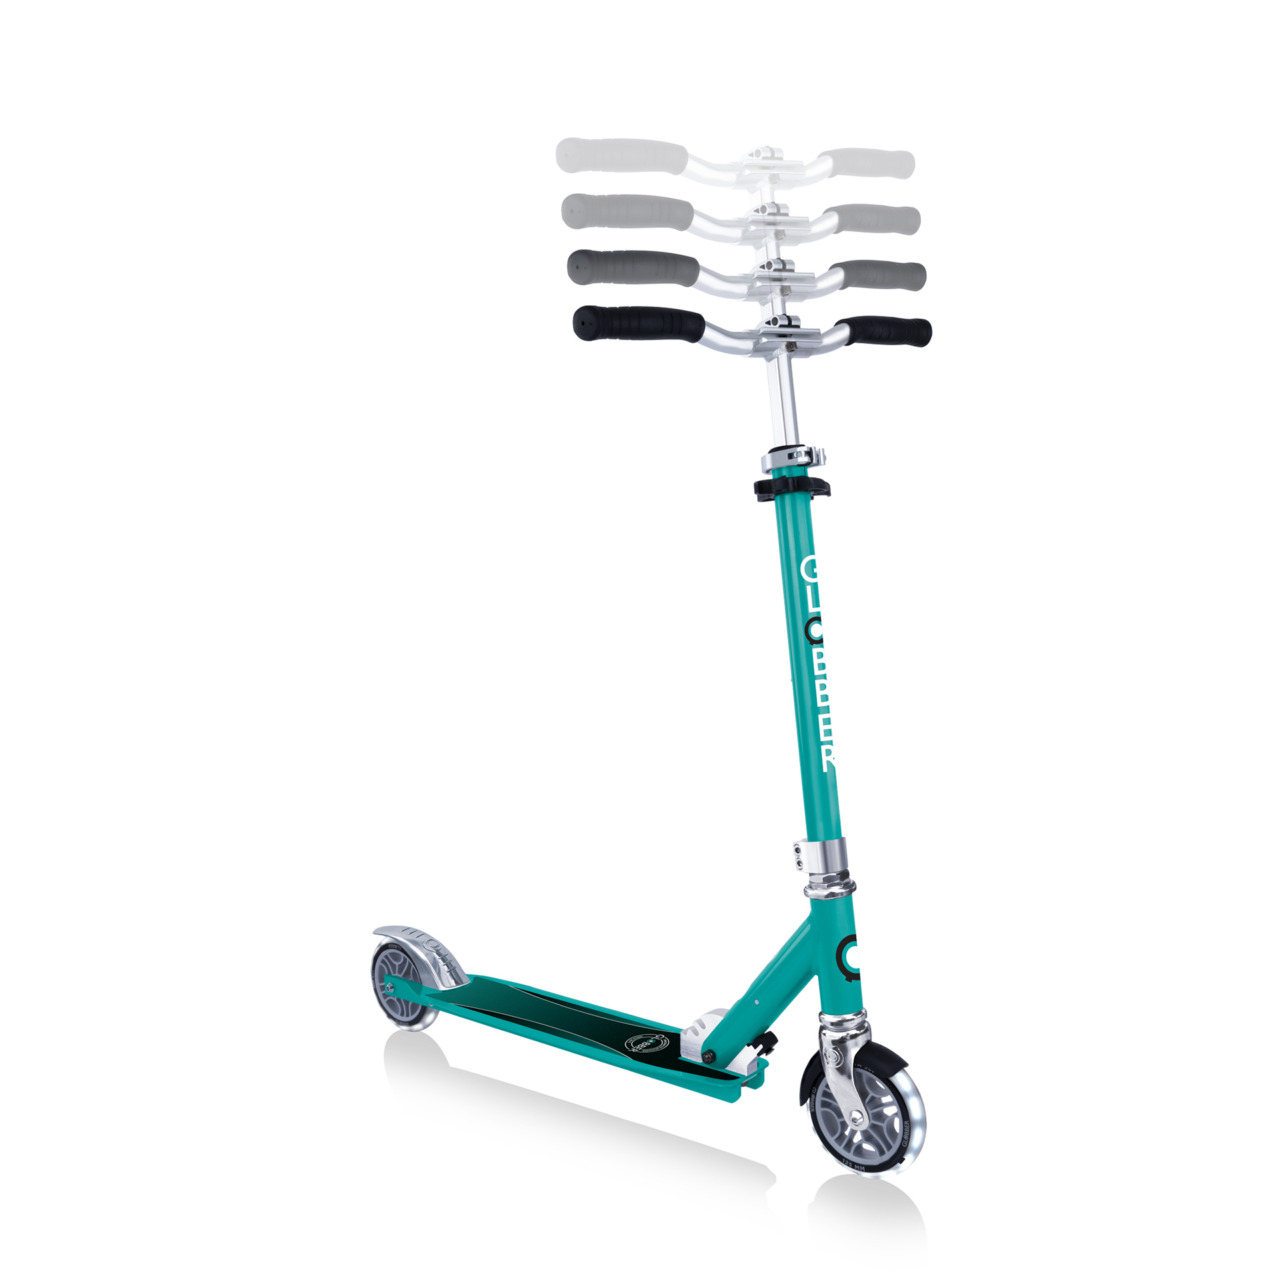 721 307 Height Adjustable Light Up Scooter